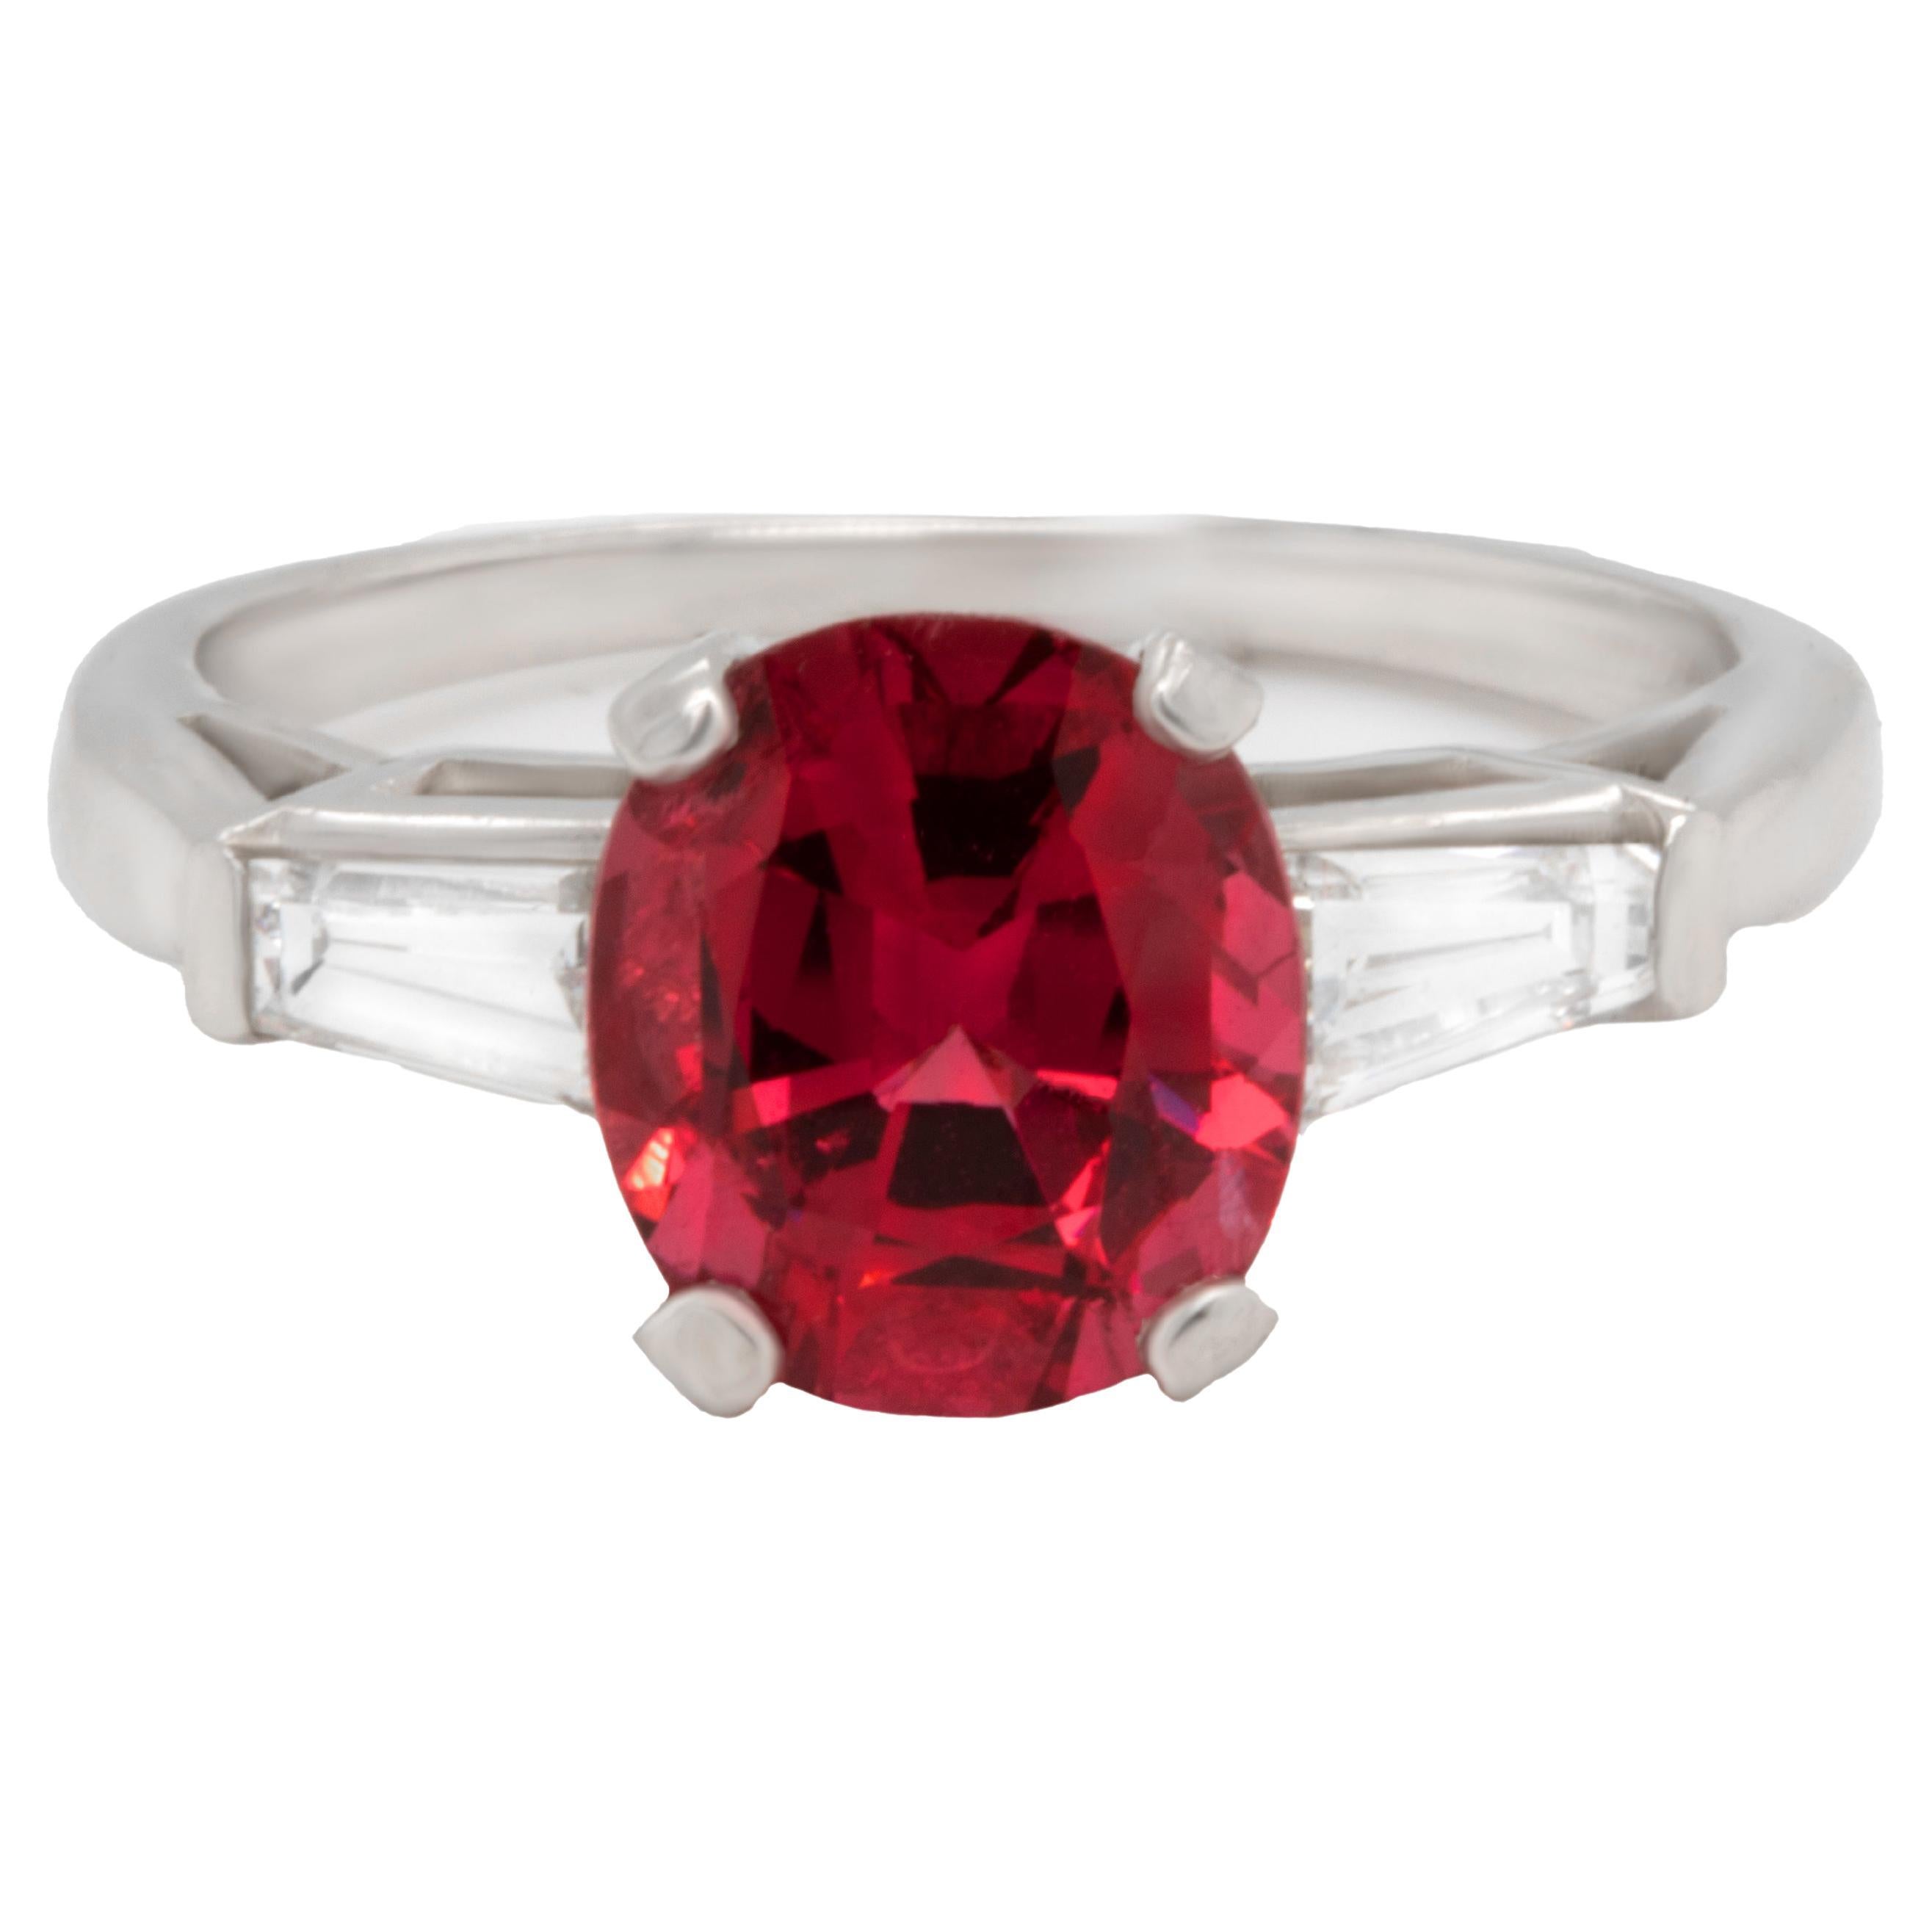 Hot Pink Spinel Ring With Diamonds 3.08 Carats Platinum For Sale